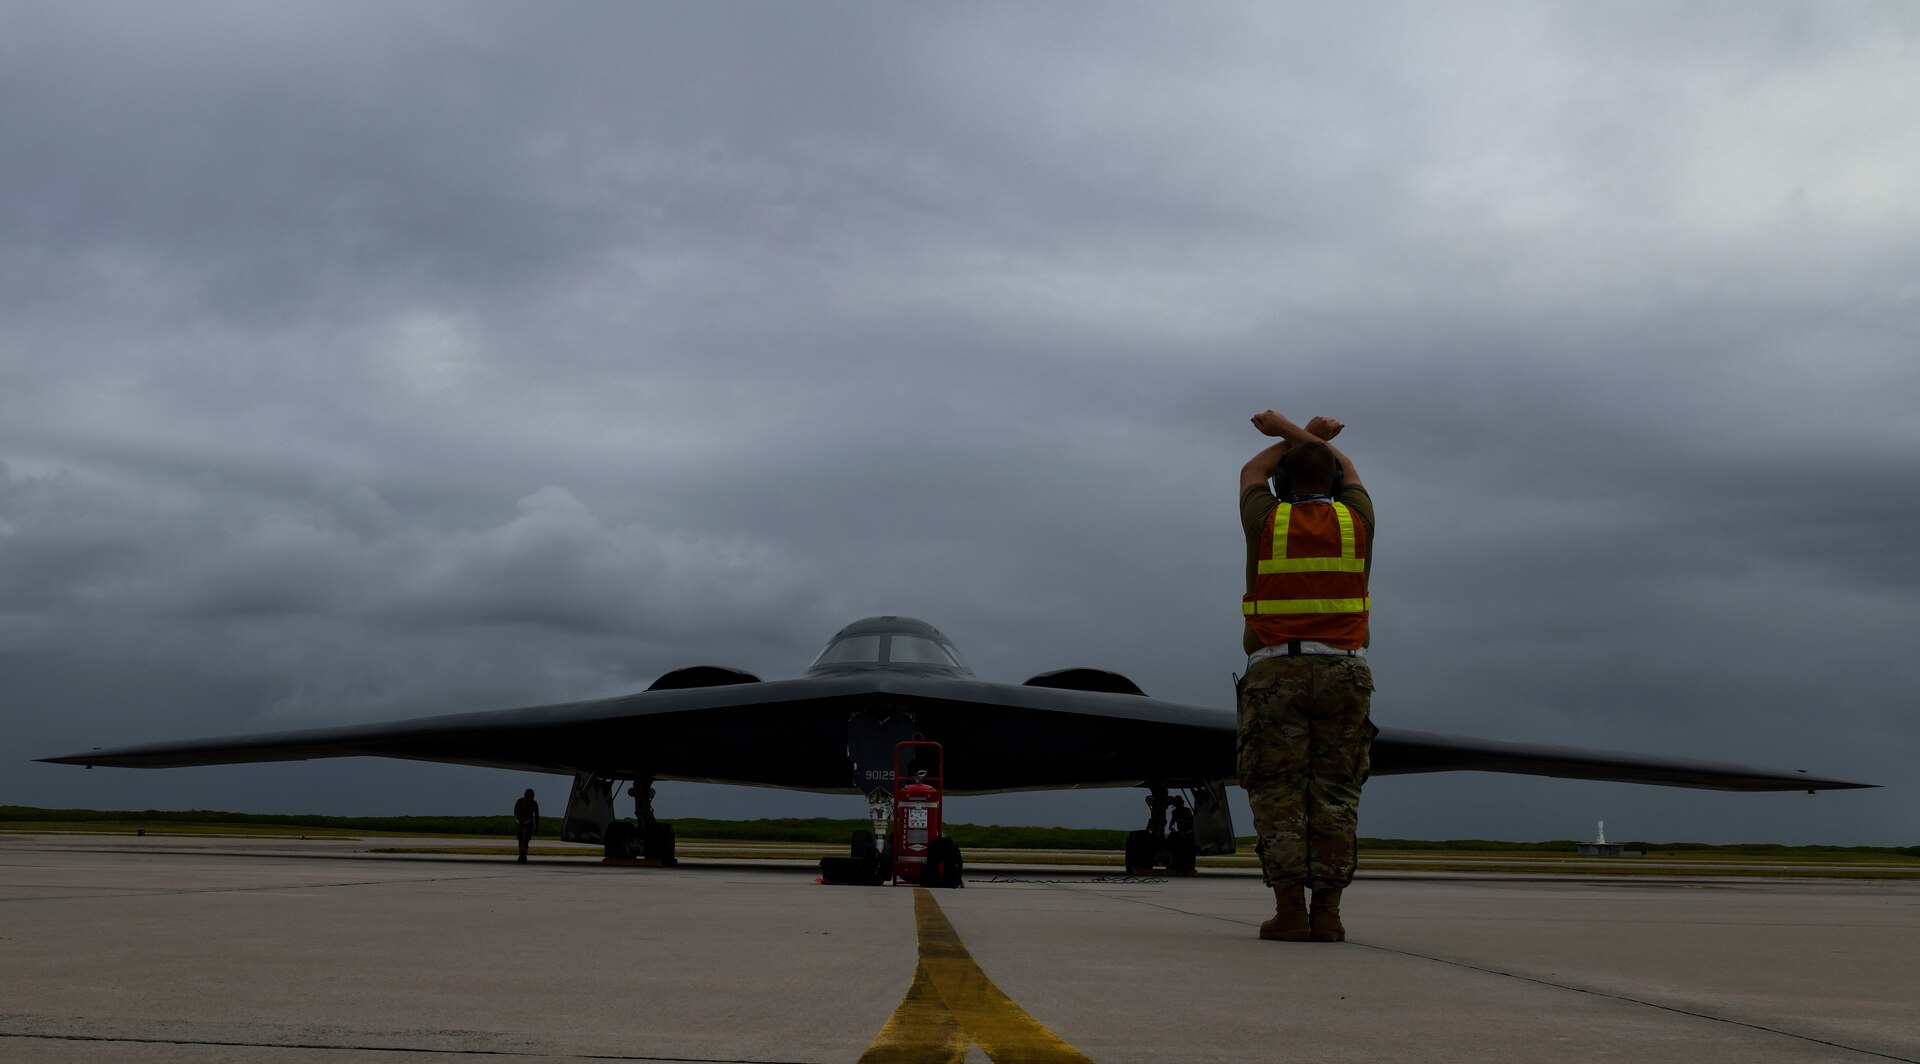 Staff Sgt. Mark Farrar, 131st Aircraft Maintenance Squadron crew chief stationed at Whiteman Air Force Base, Missouri, marshalls a B-2 Spirit Stealth Bomber as it arrives at Naval Support Facility Diego Garcia, Aug. 12, 2020. Three B-2 Spirits from Whiteman AFB deployed to NSF Diego Garcia to support U.S. security commitments in the Indo-Pacific region. (U.S. Air Force photo by Tech. Sgt. Heather Salazar)